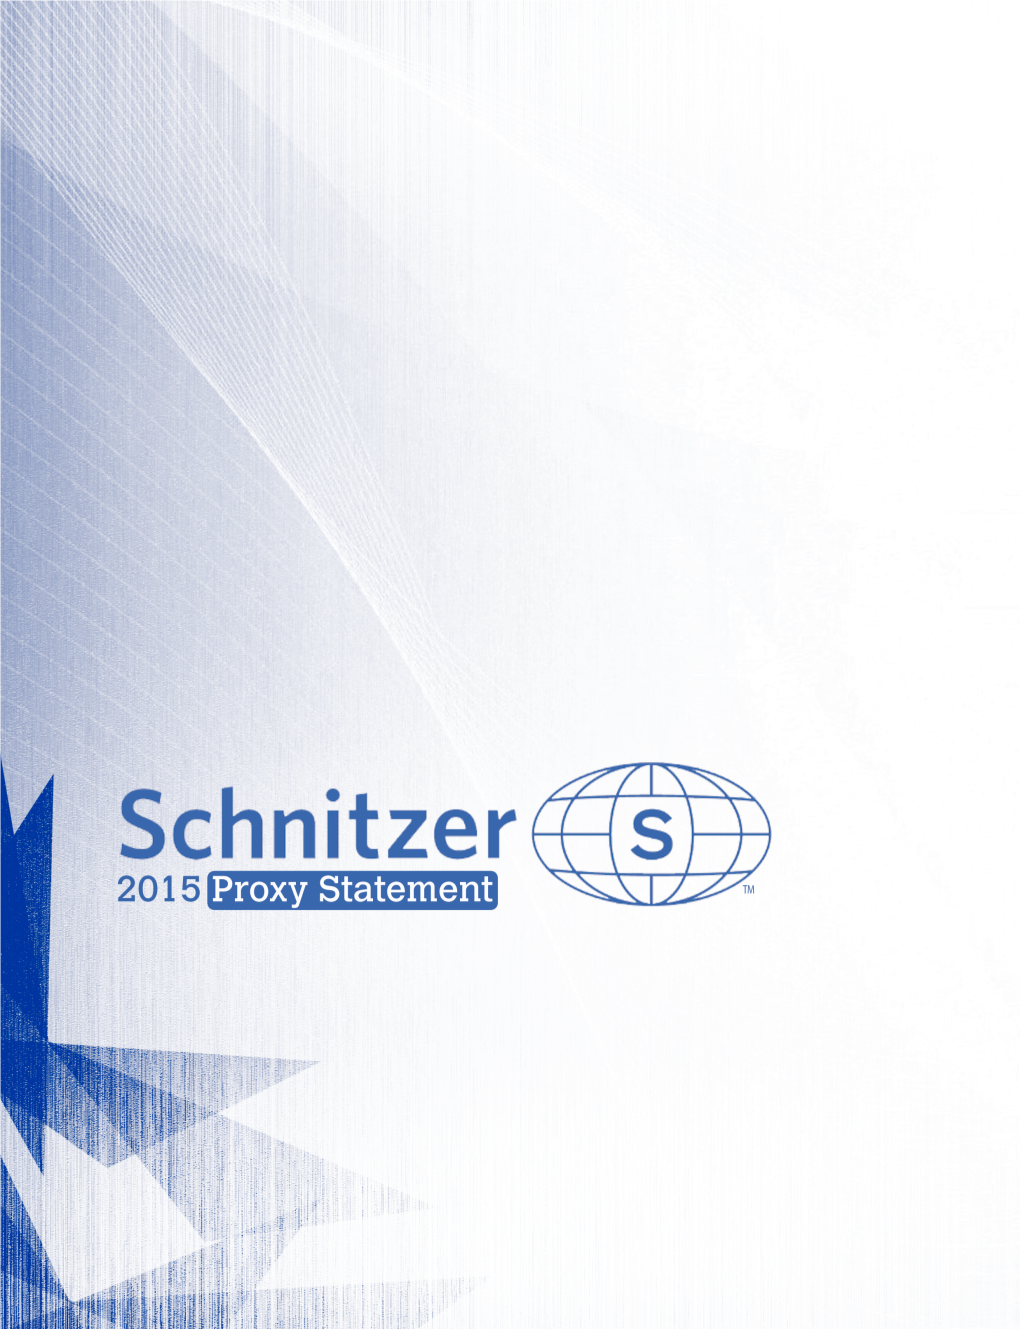 2015 Proxy Statement | 1 Notice of Annual Meeting of Shareholders of Schnitzer Steel Industries, Inc